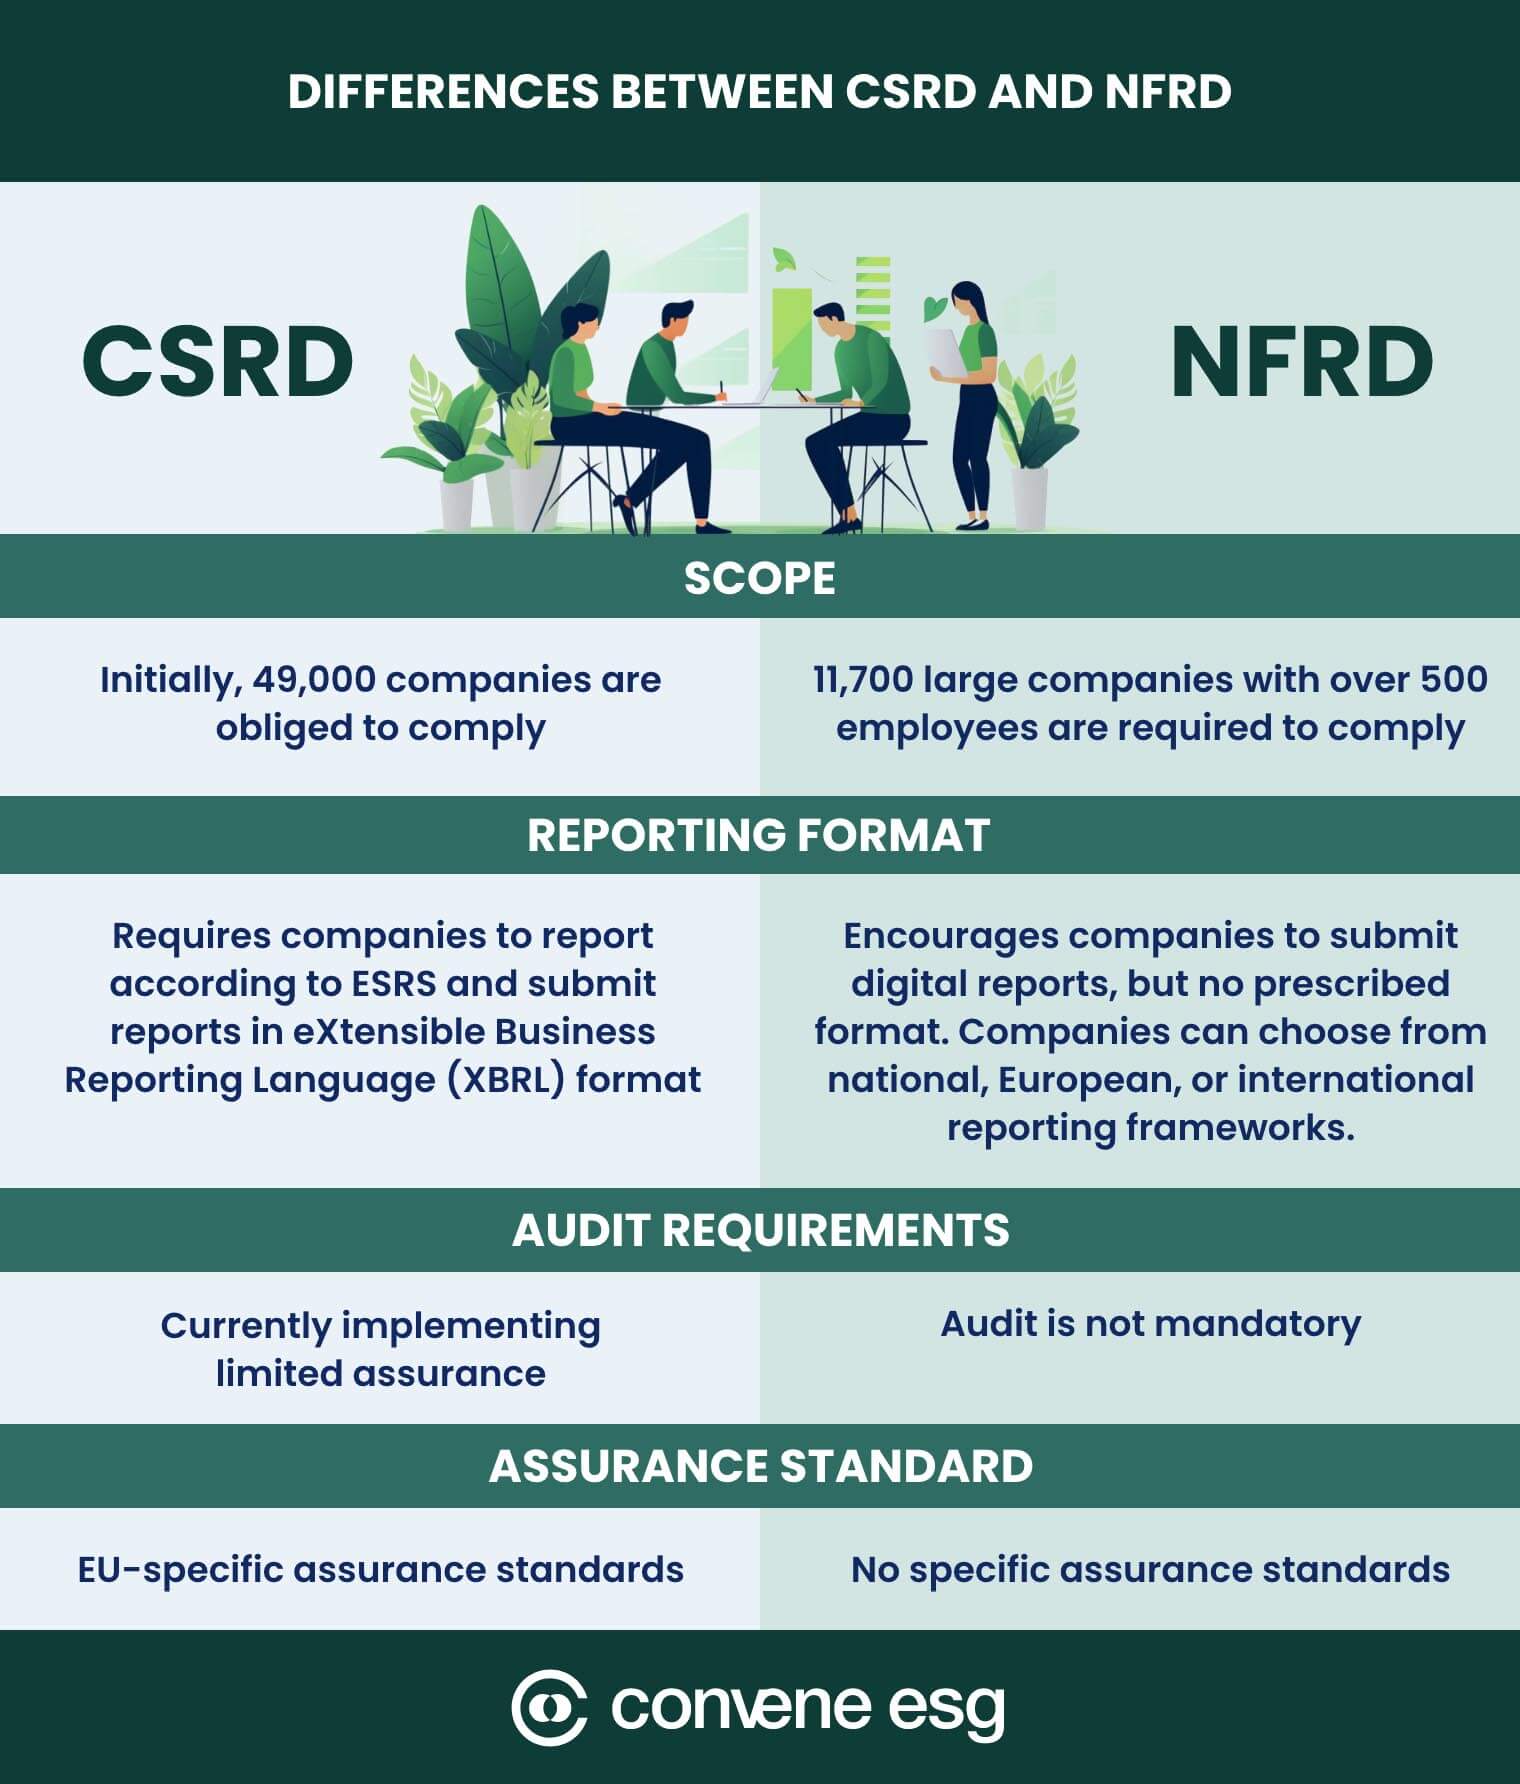 CSRD vs. NFRD: A Side-by-Side Comparison